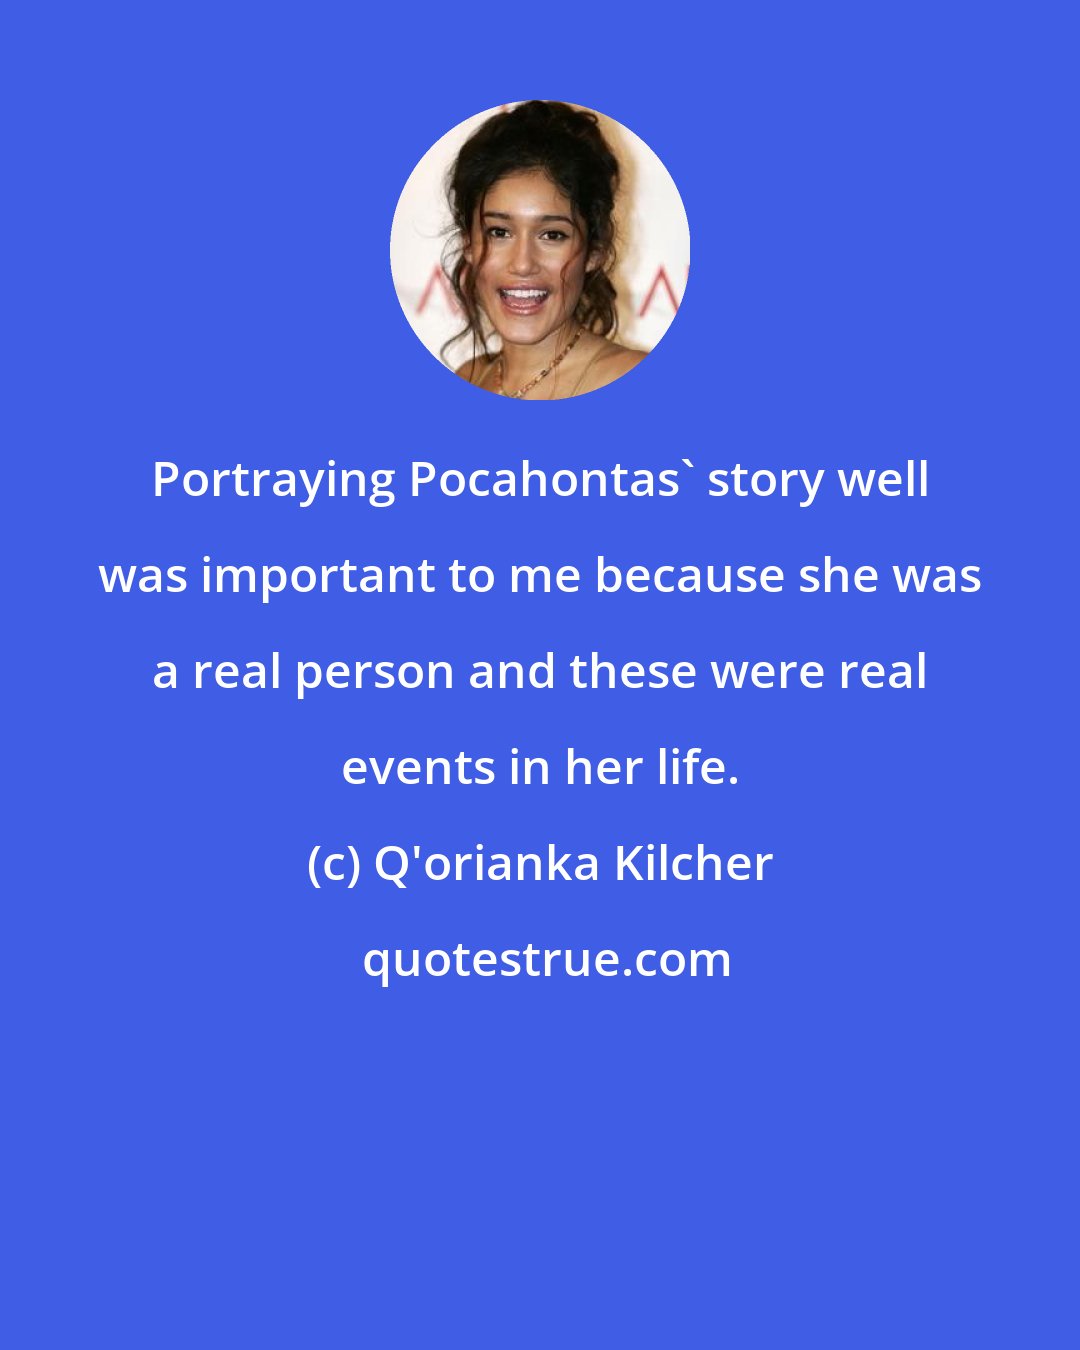 Q'orianka Kilcher: Portraying Pocahontas' story well was important to me because she was a real person and these were real events in her life.